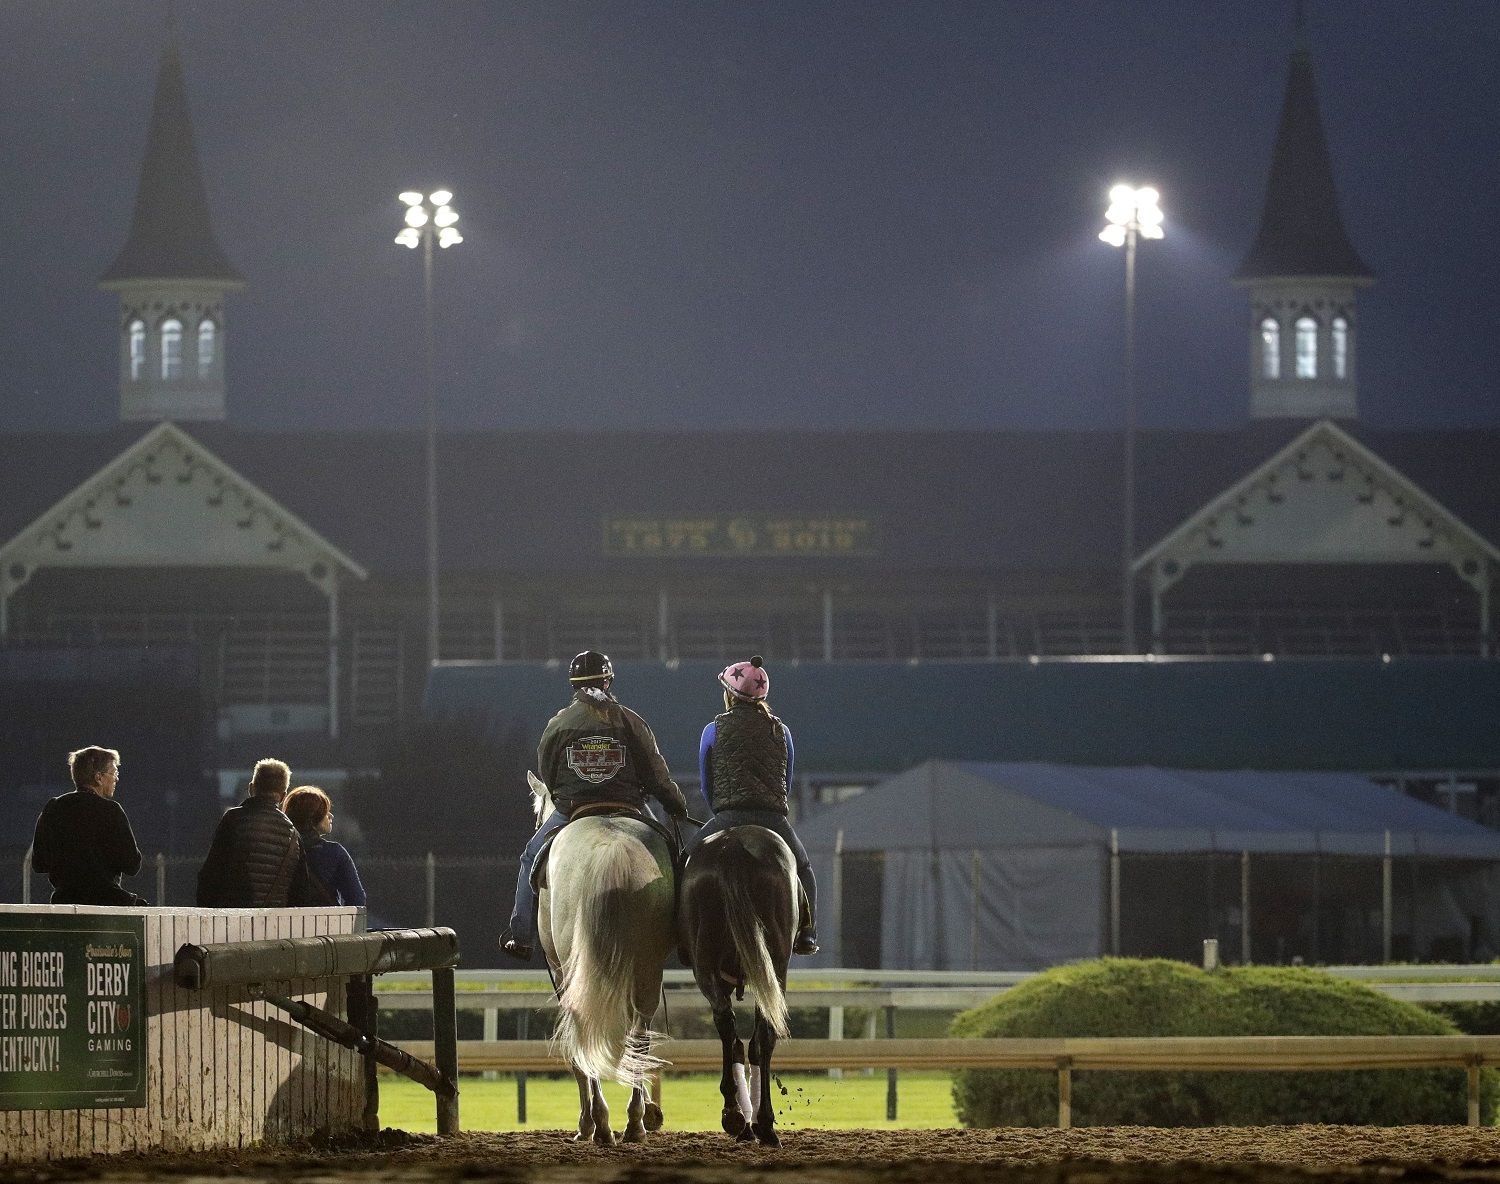 Kentucky Derby hopeful Gray Magician is led onto the track for a workout at Churchill Downs Tuesday, April 30, 2019, in Louisville, Ky. The 145th running of the Kentucky Derby is scheduled for Saturday, May 4. (AP Photo/Charlie Riedel)